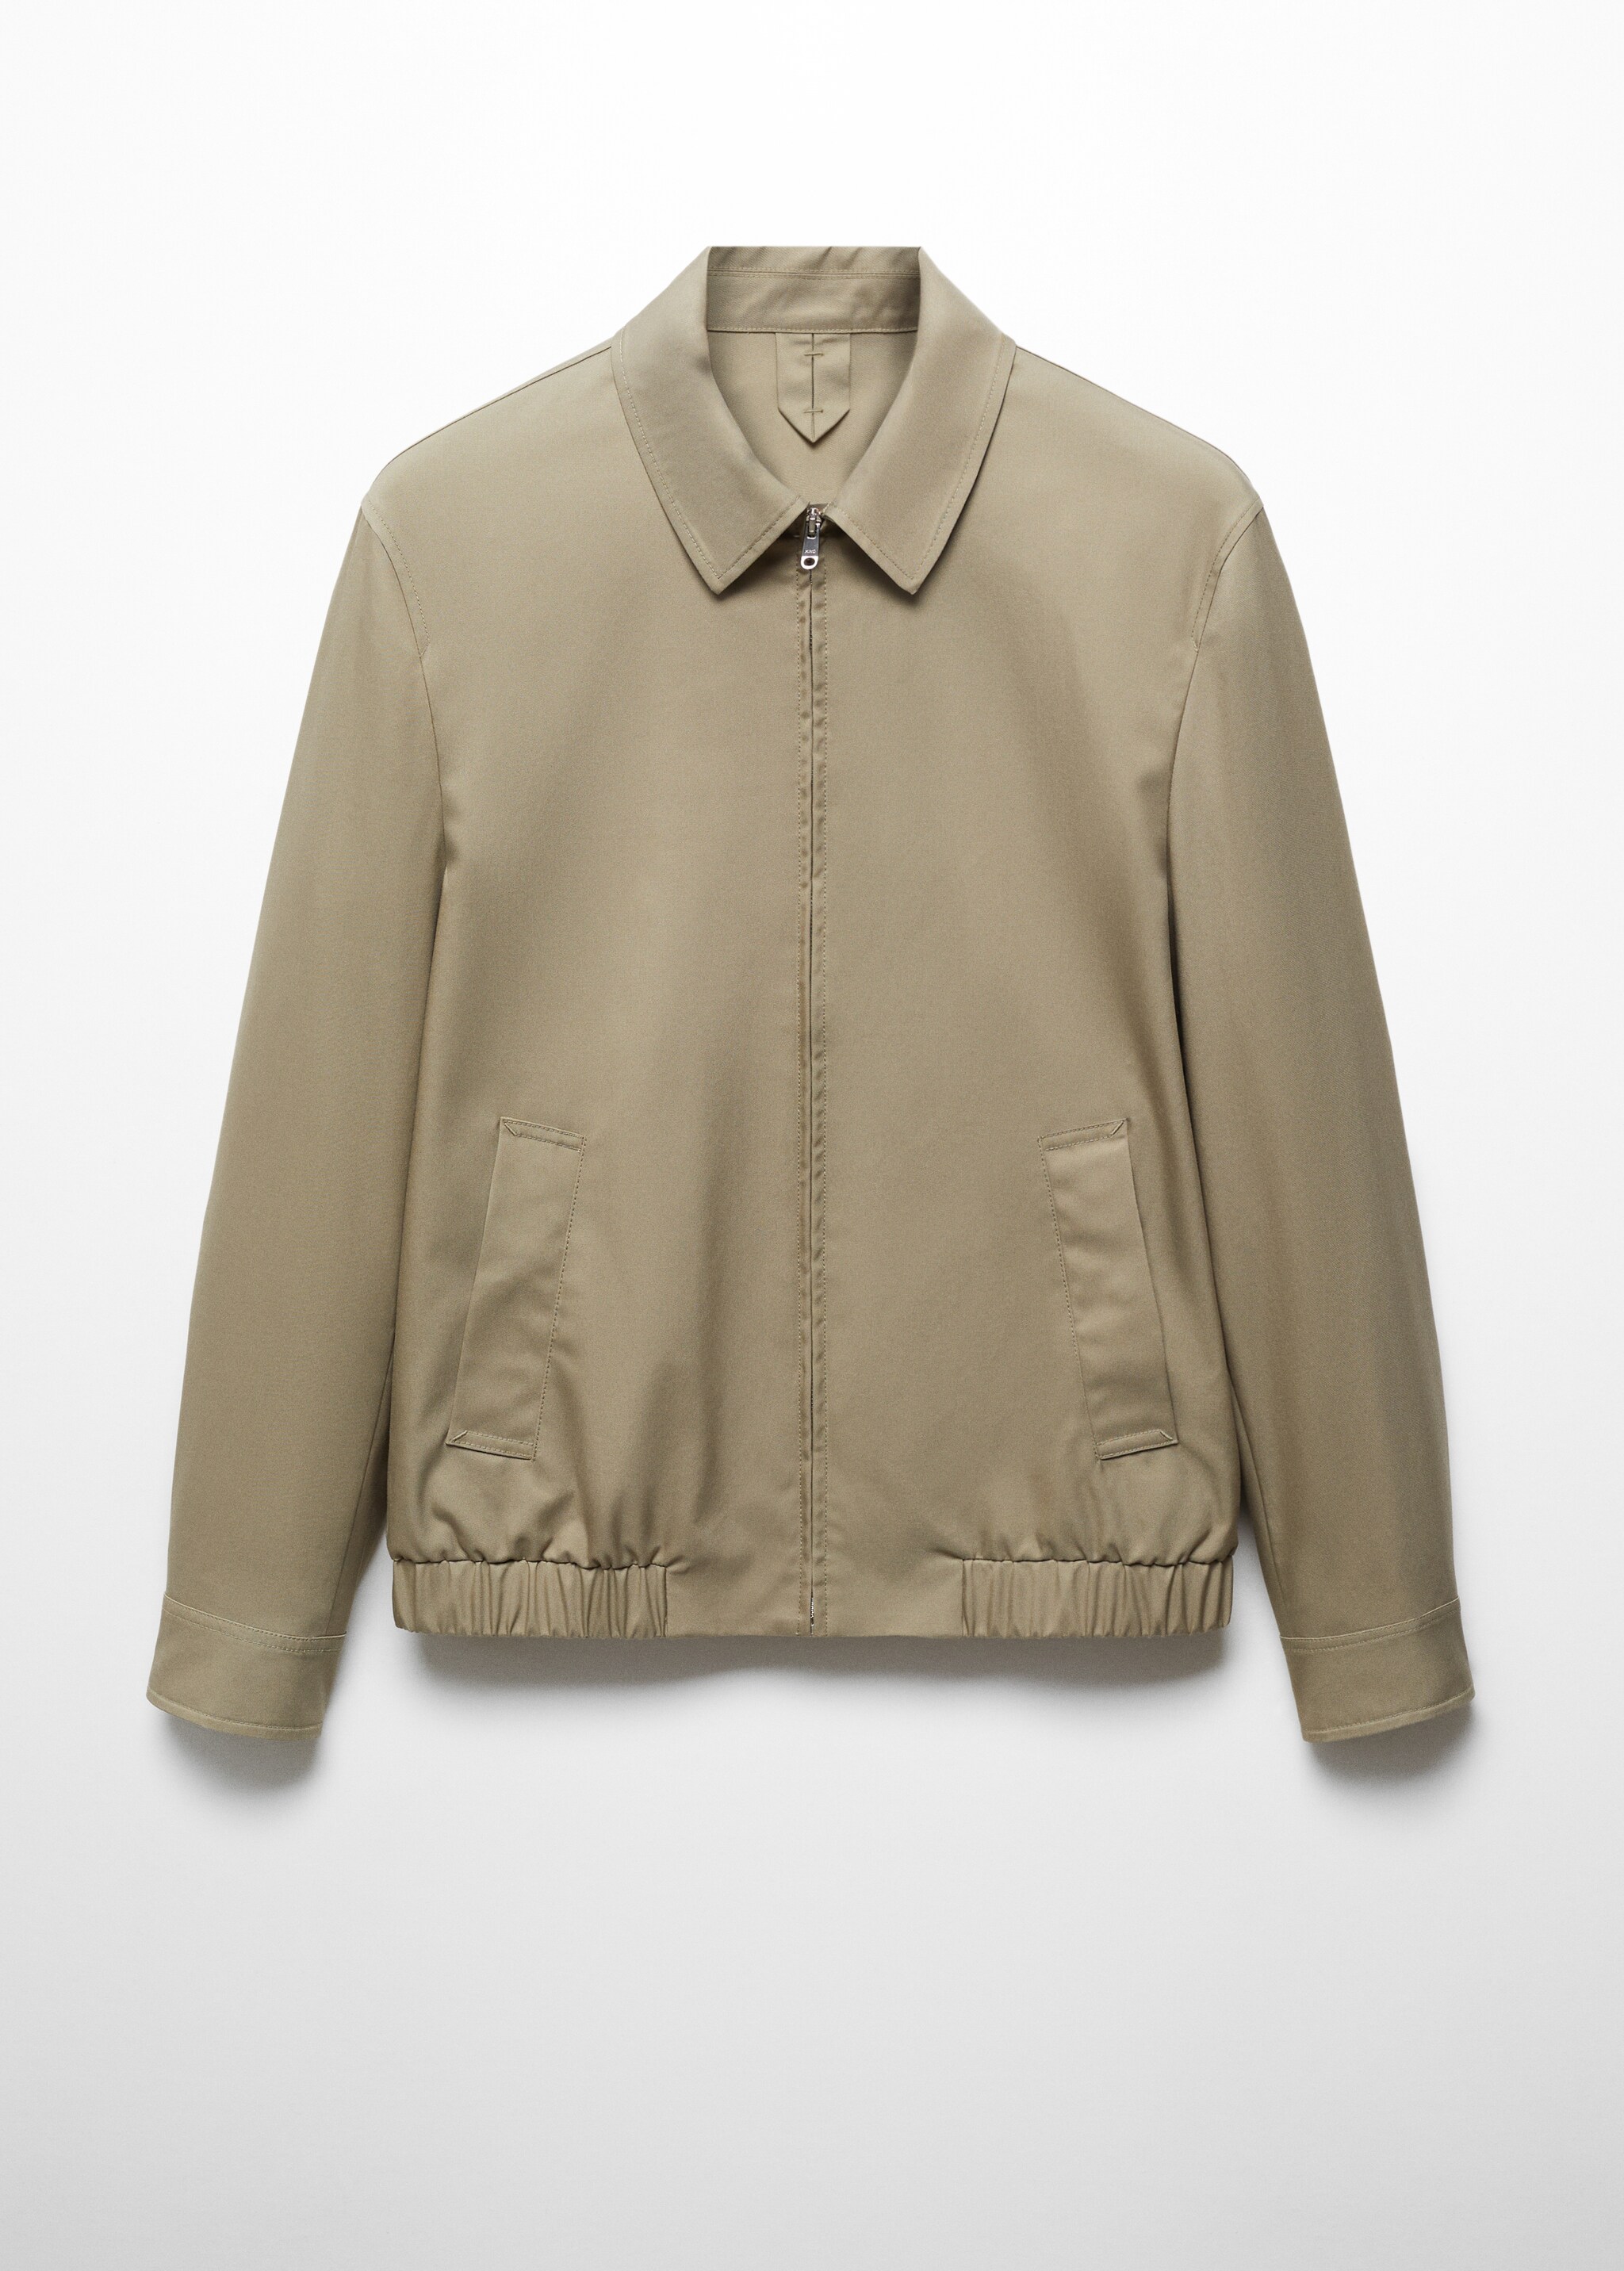 Bomber jacket with zip - Article without model